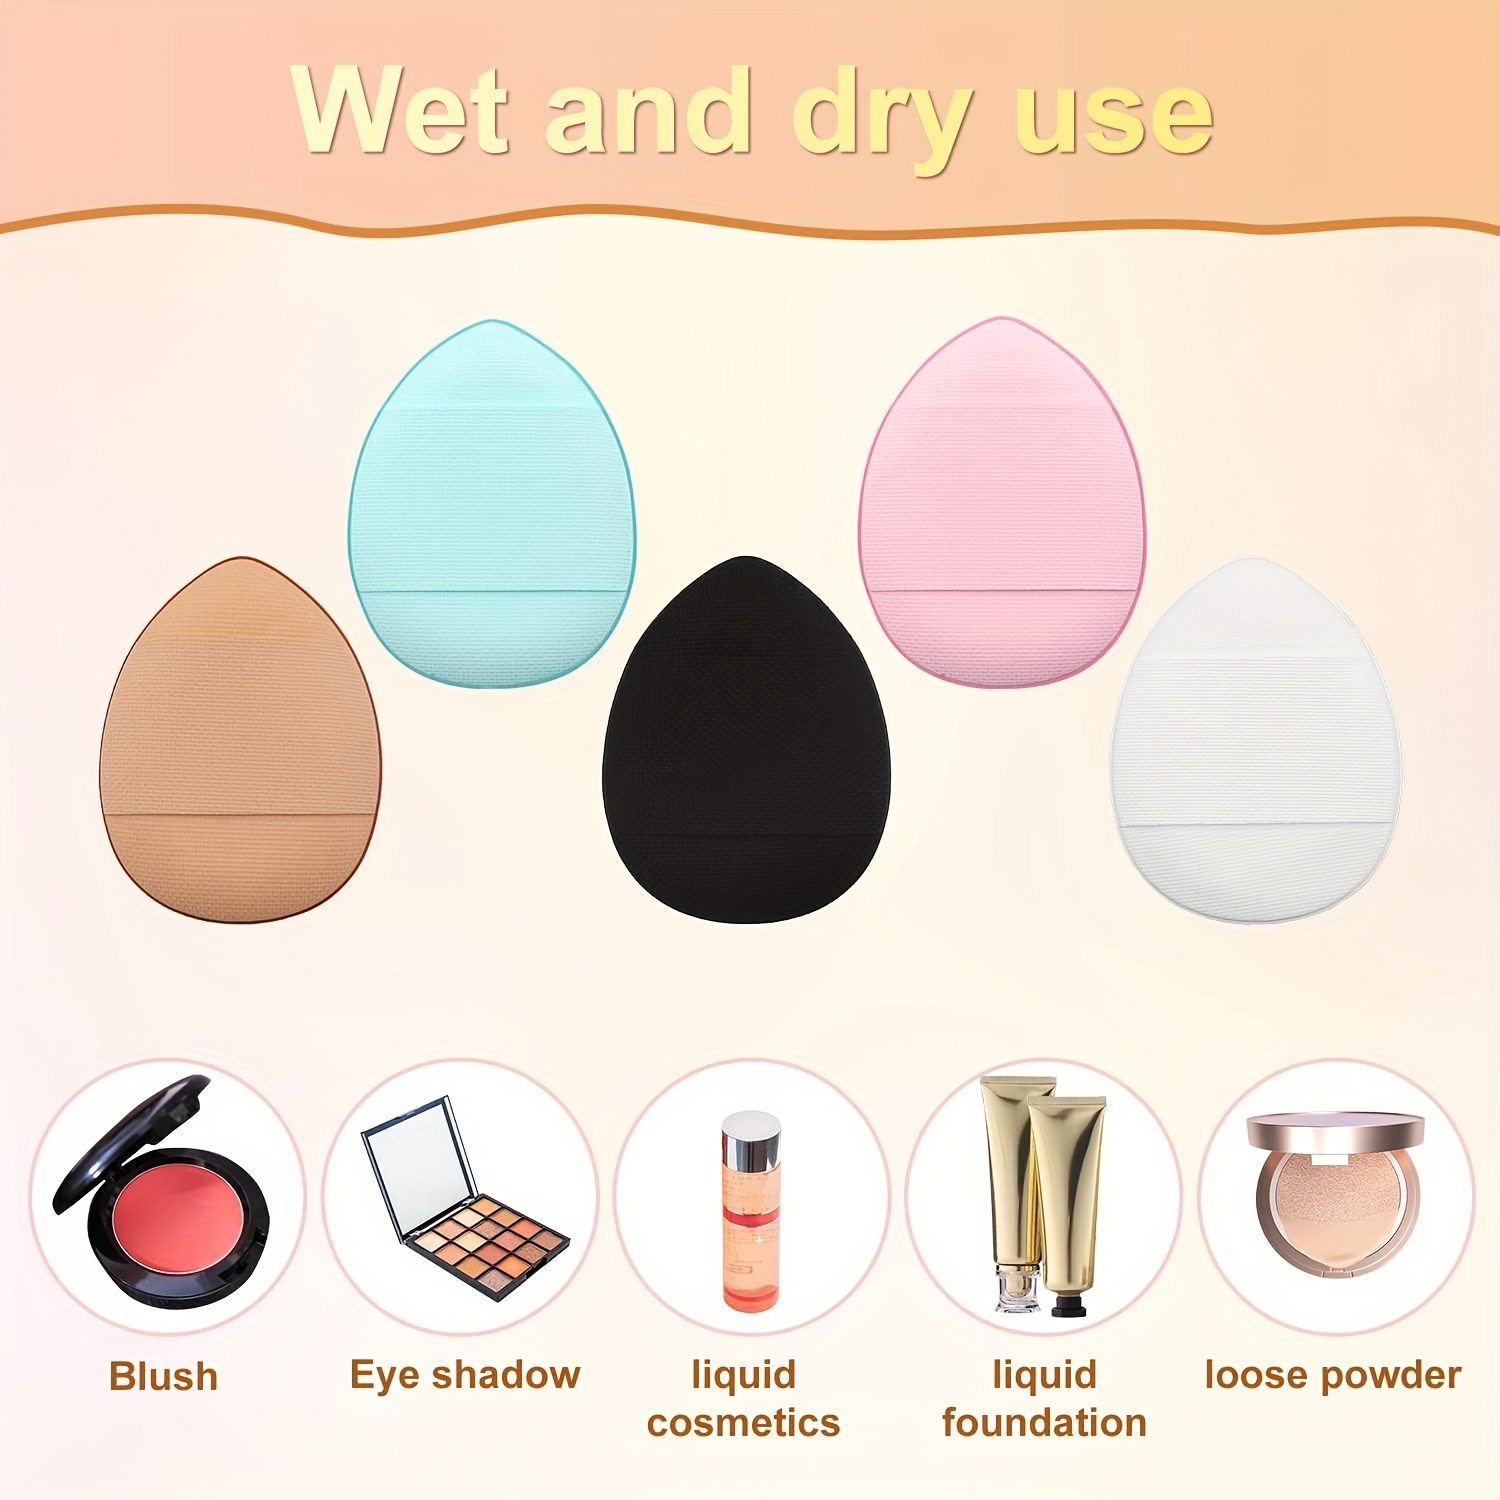 Girl's Mini Makeup Sponge Makeup Brush Cleaner Washing Machine ( only black  with drying function )